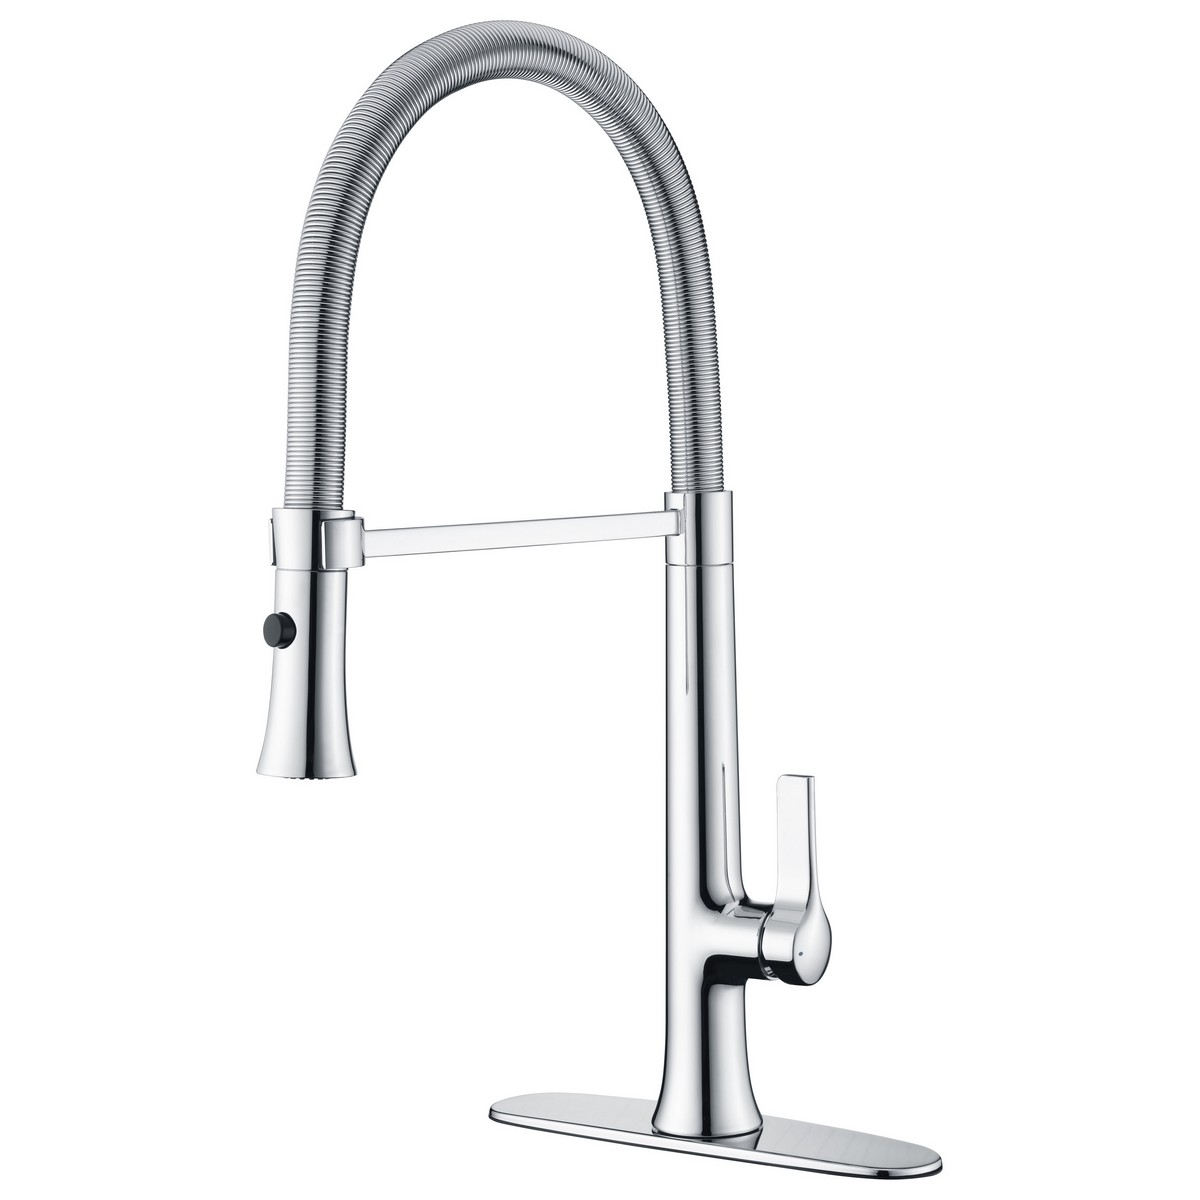 ULTRA FAUCETS UF1690 NITA DECK MOUNT SPRING SPOUT KITCHEN FAUCET WITH PULL-DOWN SPRAY